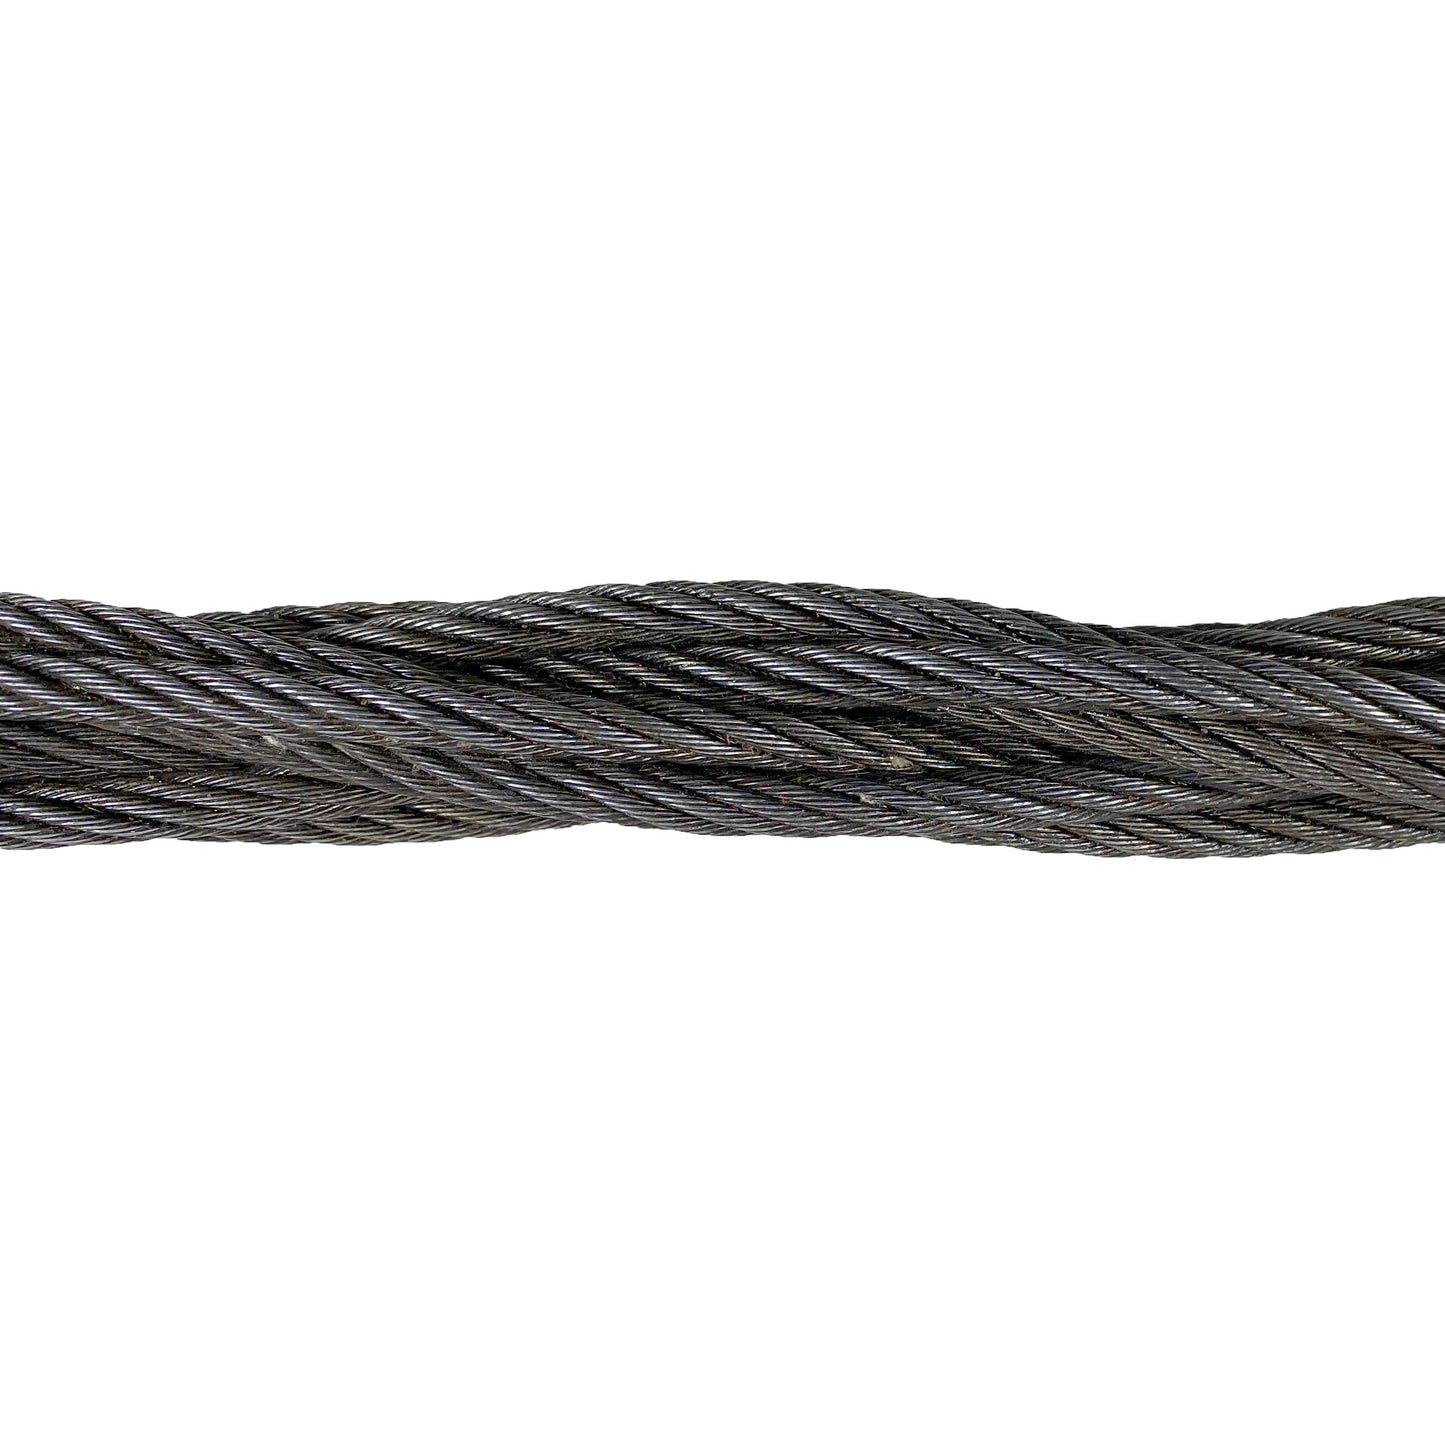 12 inch x 8 foot Nine Part Braided Wire Rope Sling image 3 of 3